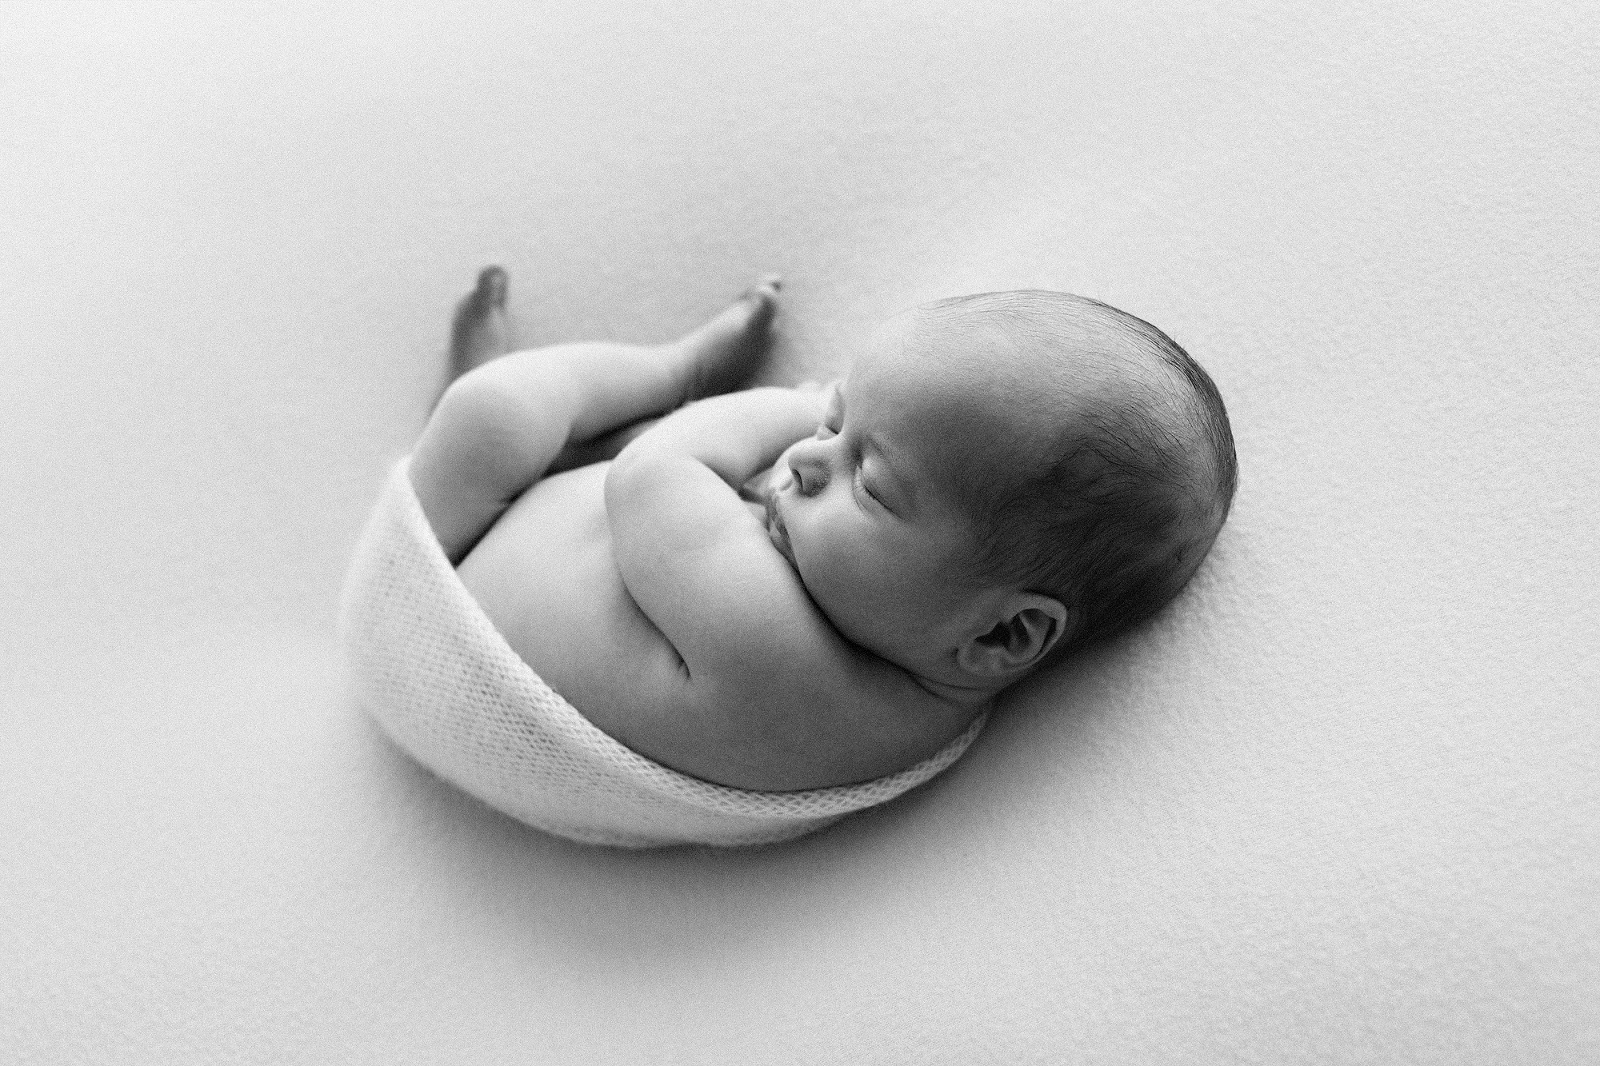 black and white image of a newborn baby curled up on a blanket